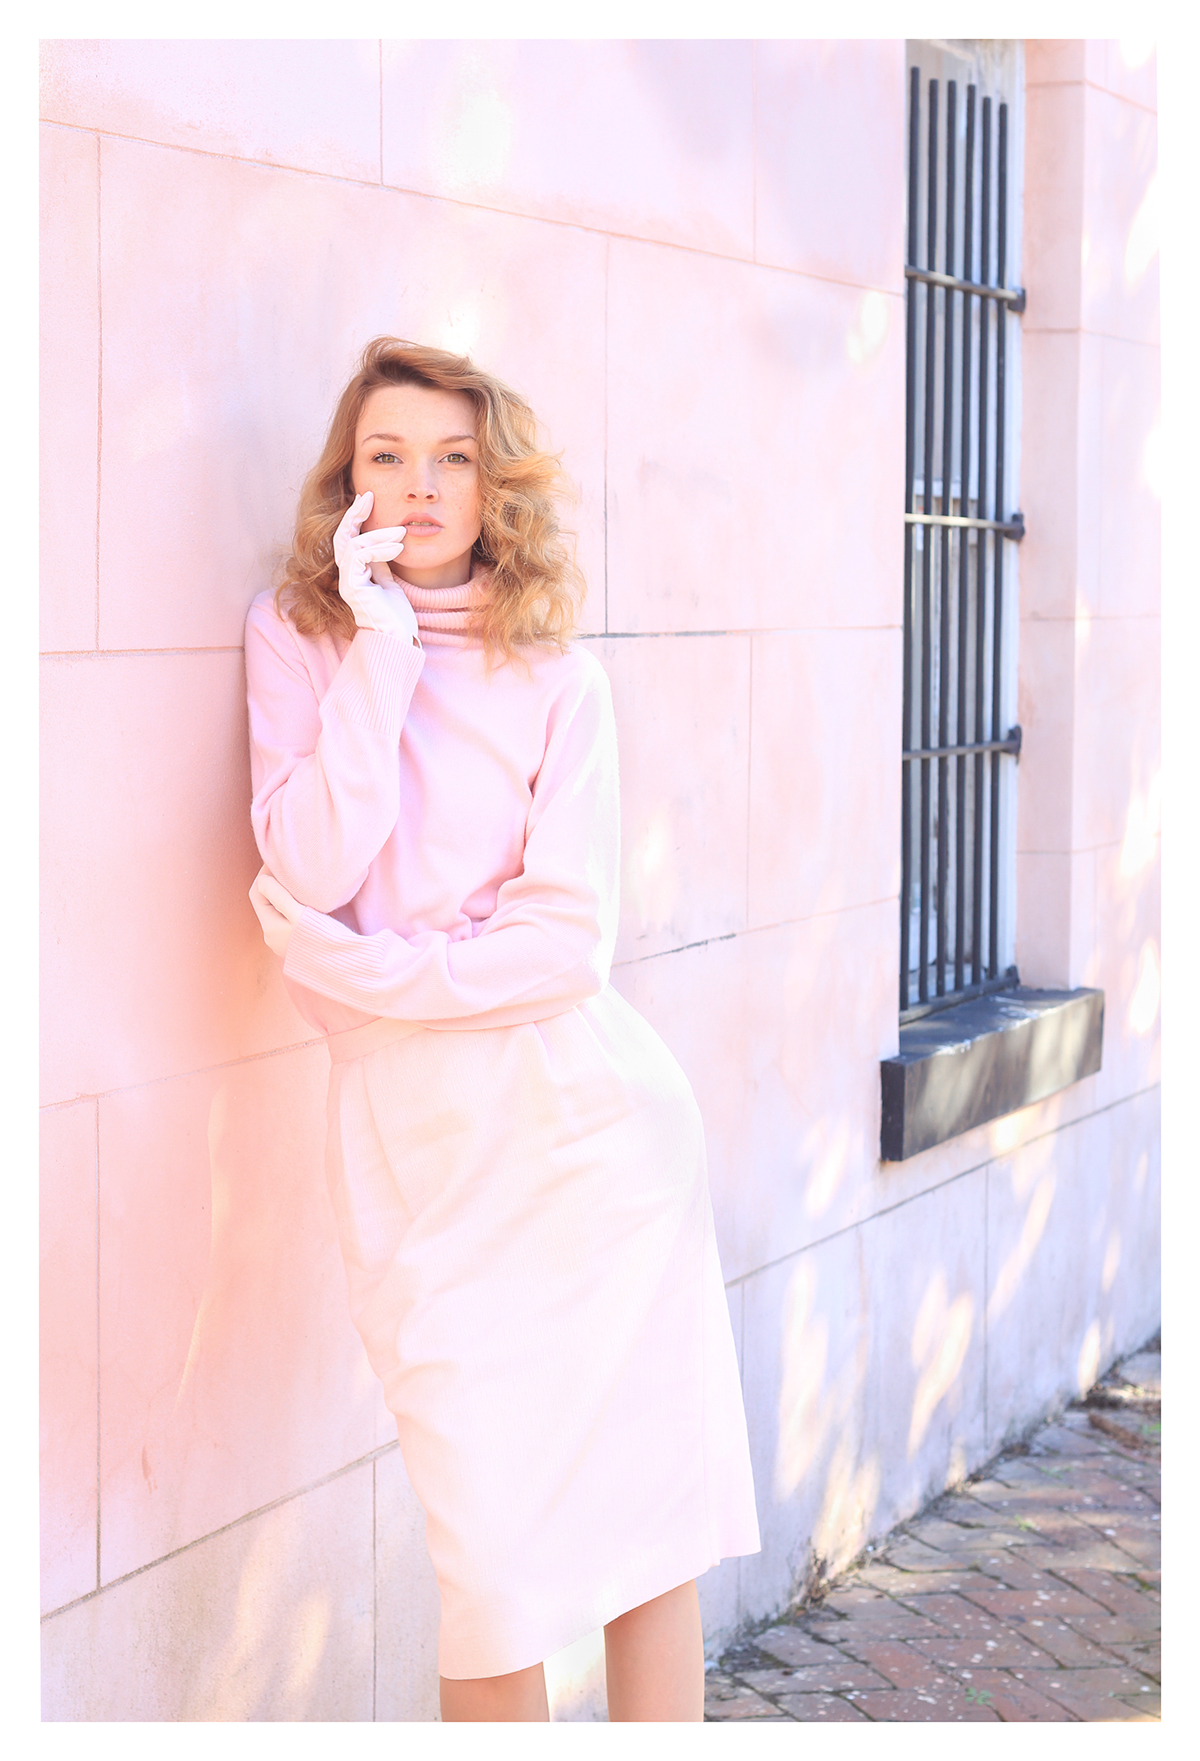 color monochrome Complimentary soft pastel saturated portraits fashionphotography lifestyle styling  direction Outdoor